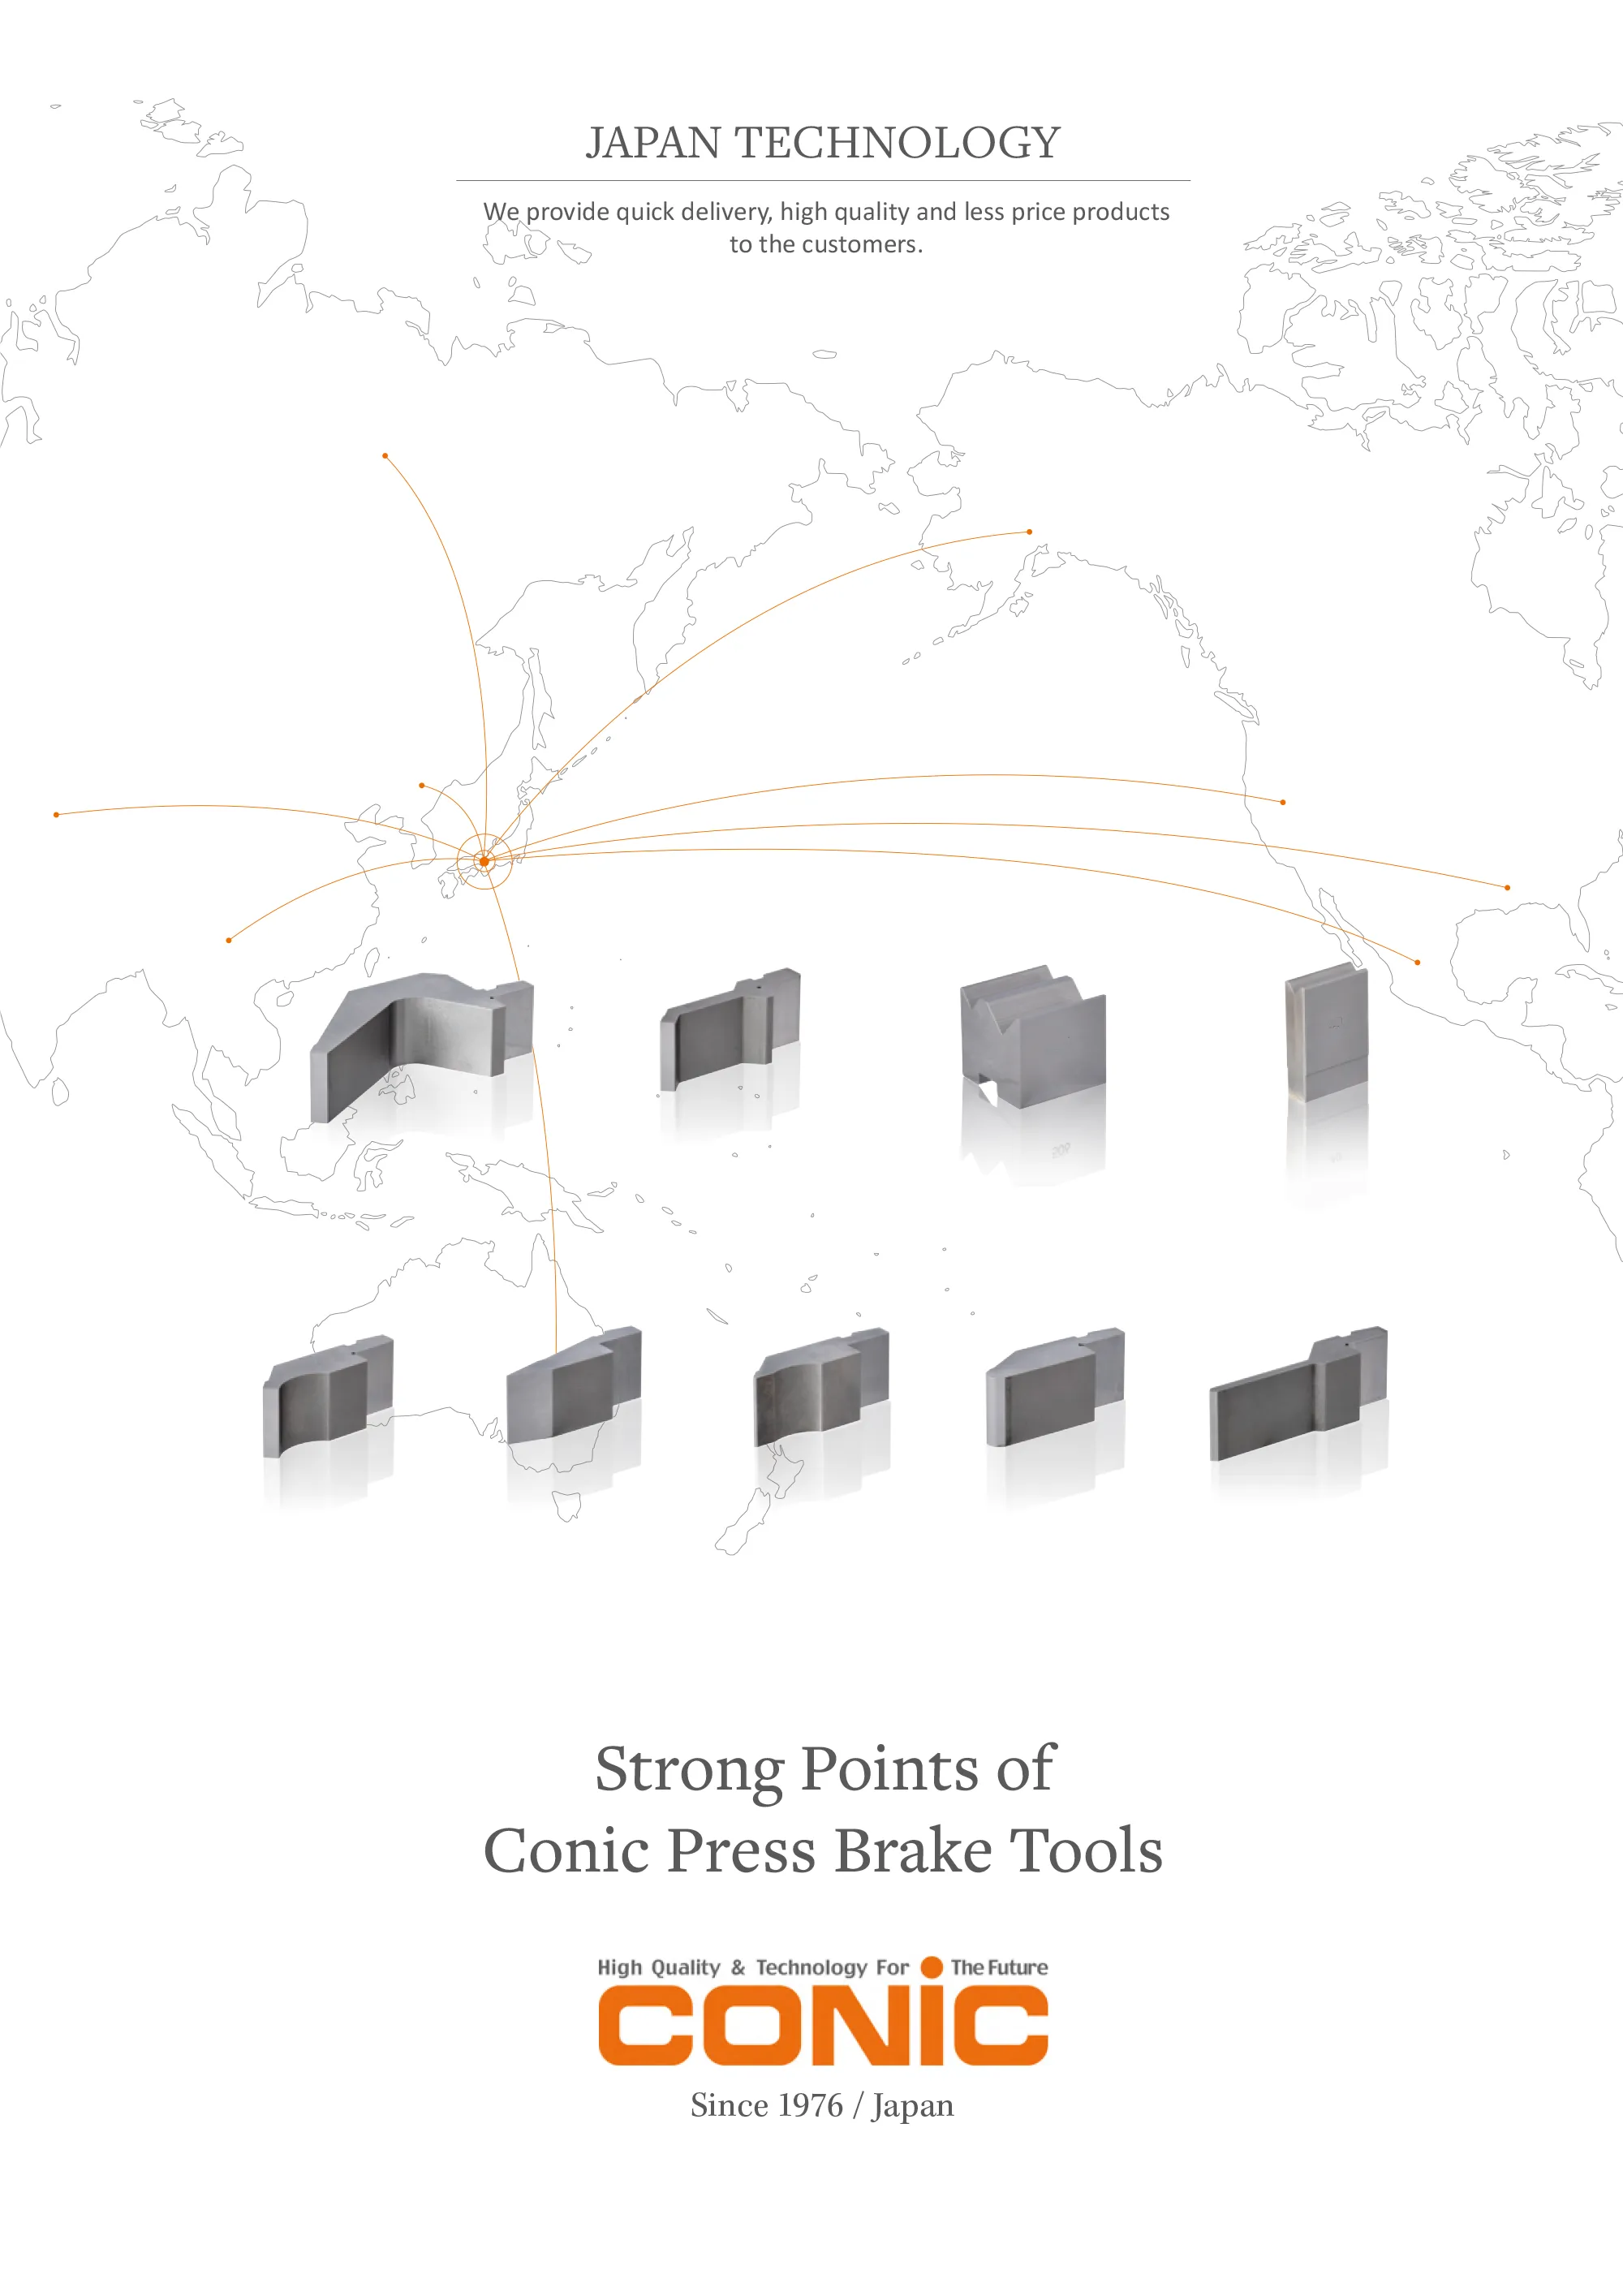 Strong points of CONIC PRESS BRAKE tools